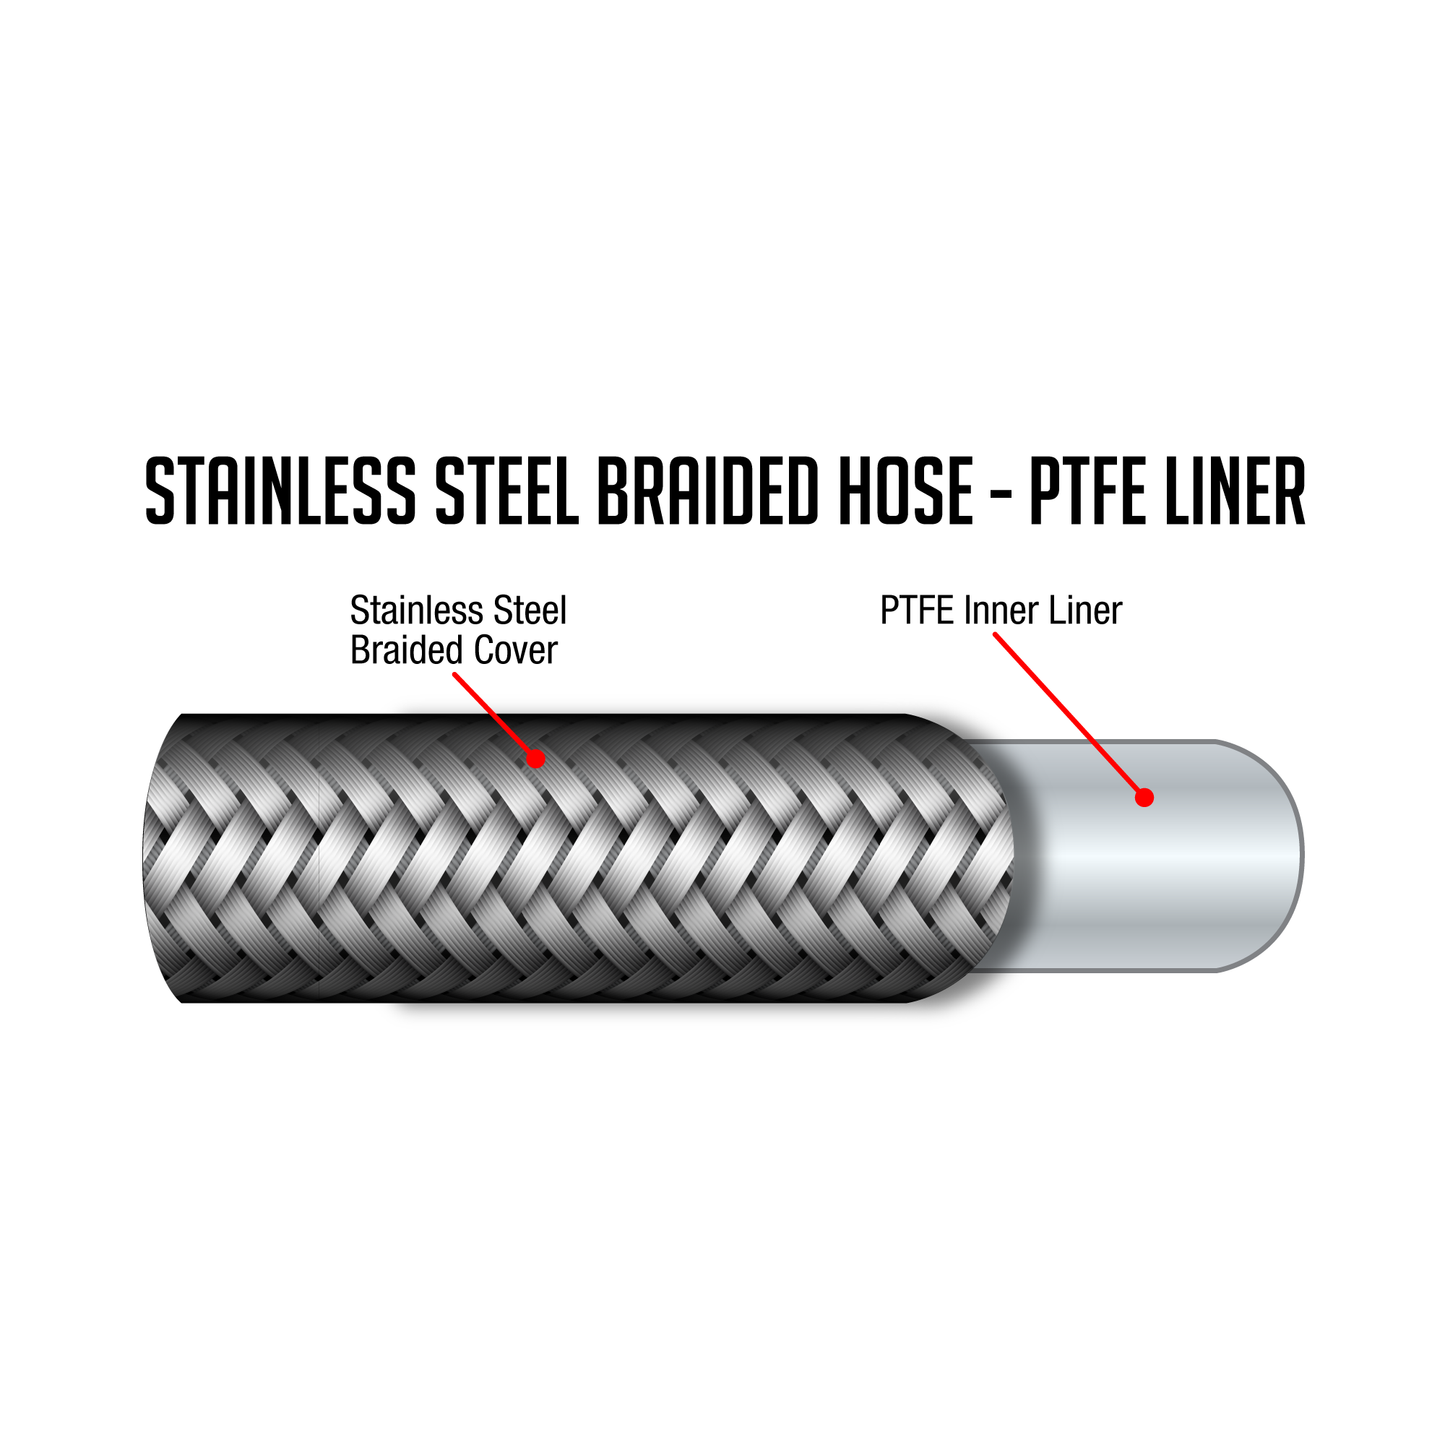 Stainless Steel Braided Hose - PTFE Liner - Per Foot